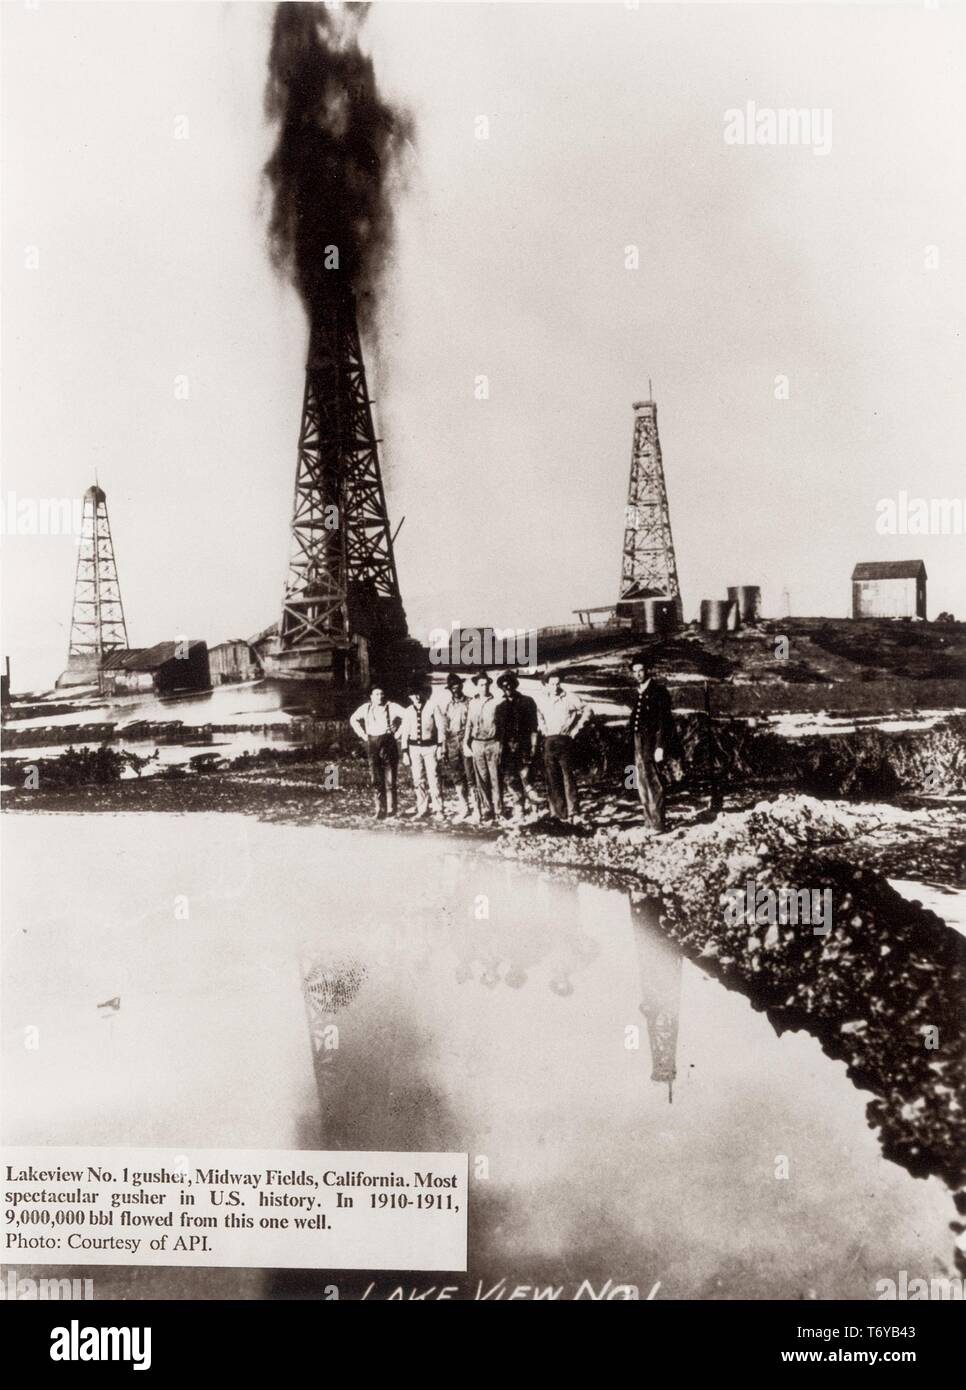 Workers stand at the edge of an open oil slick while Lakeview Gusher Number One explodes from a derrick in the background, Midway-Sunset Oil Field, California, 1910. Image courtesy American Petroleum Institute/US Department of Energy. () Stock Photo